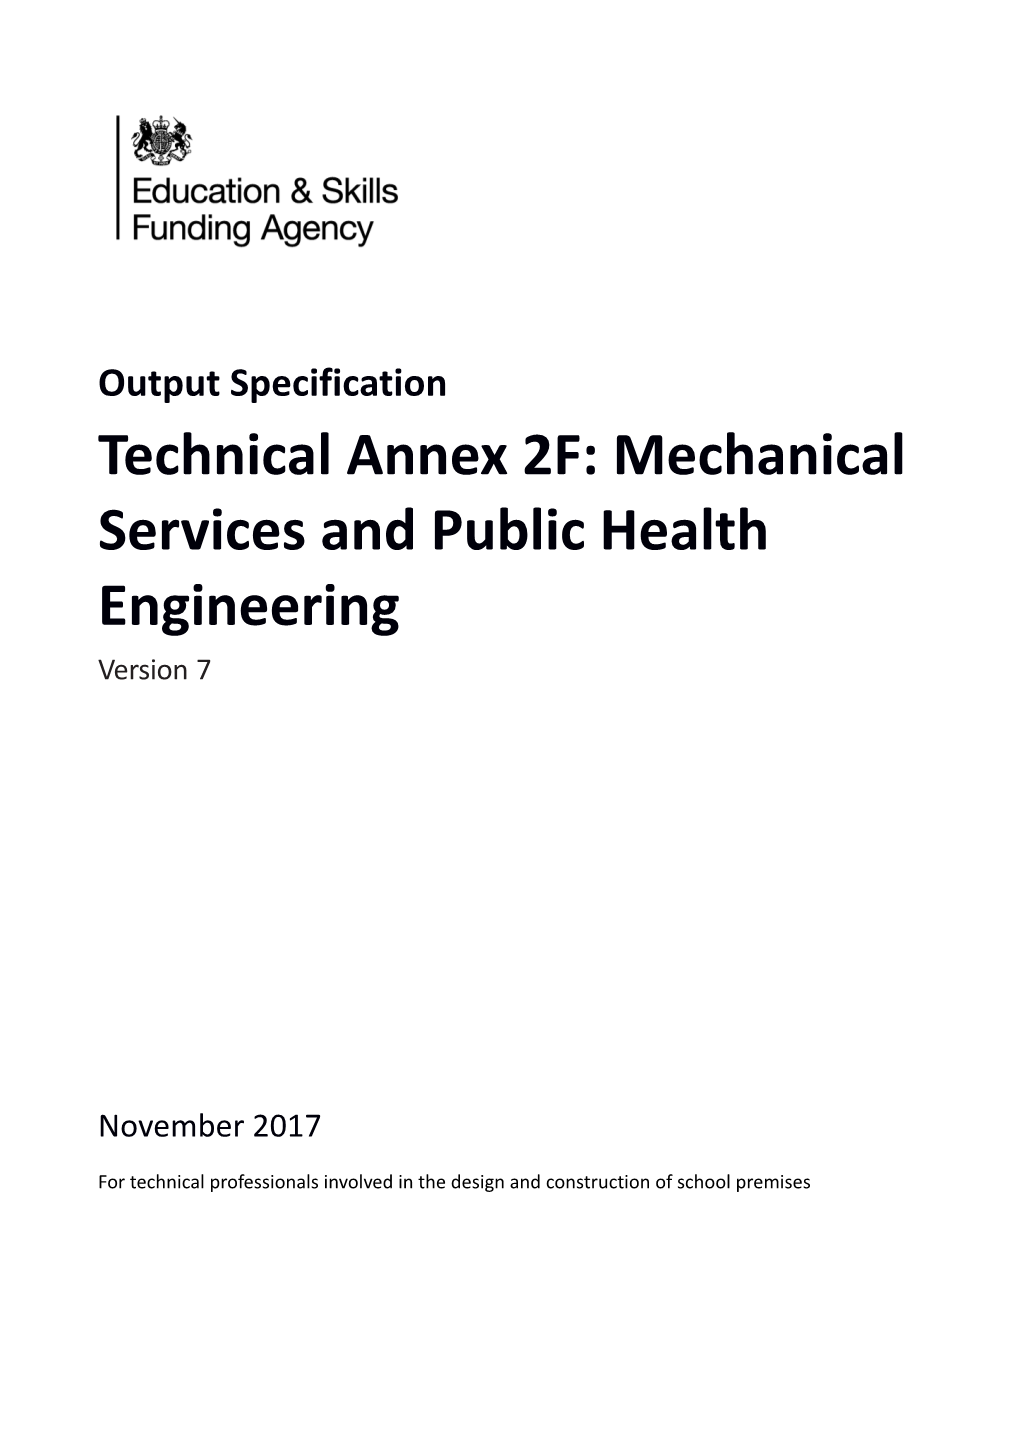 Technical Annex 2F:Mechanical Services and Public Health Engineering